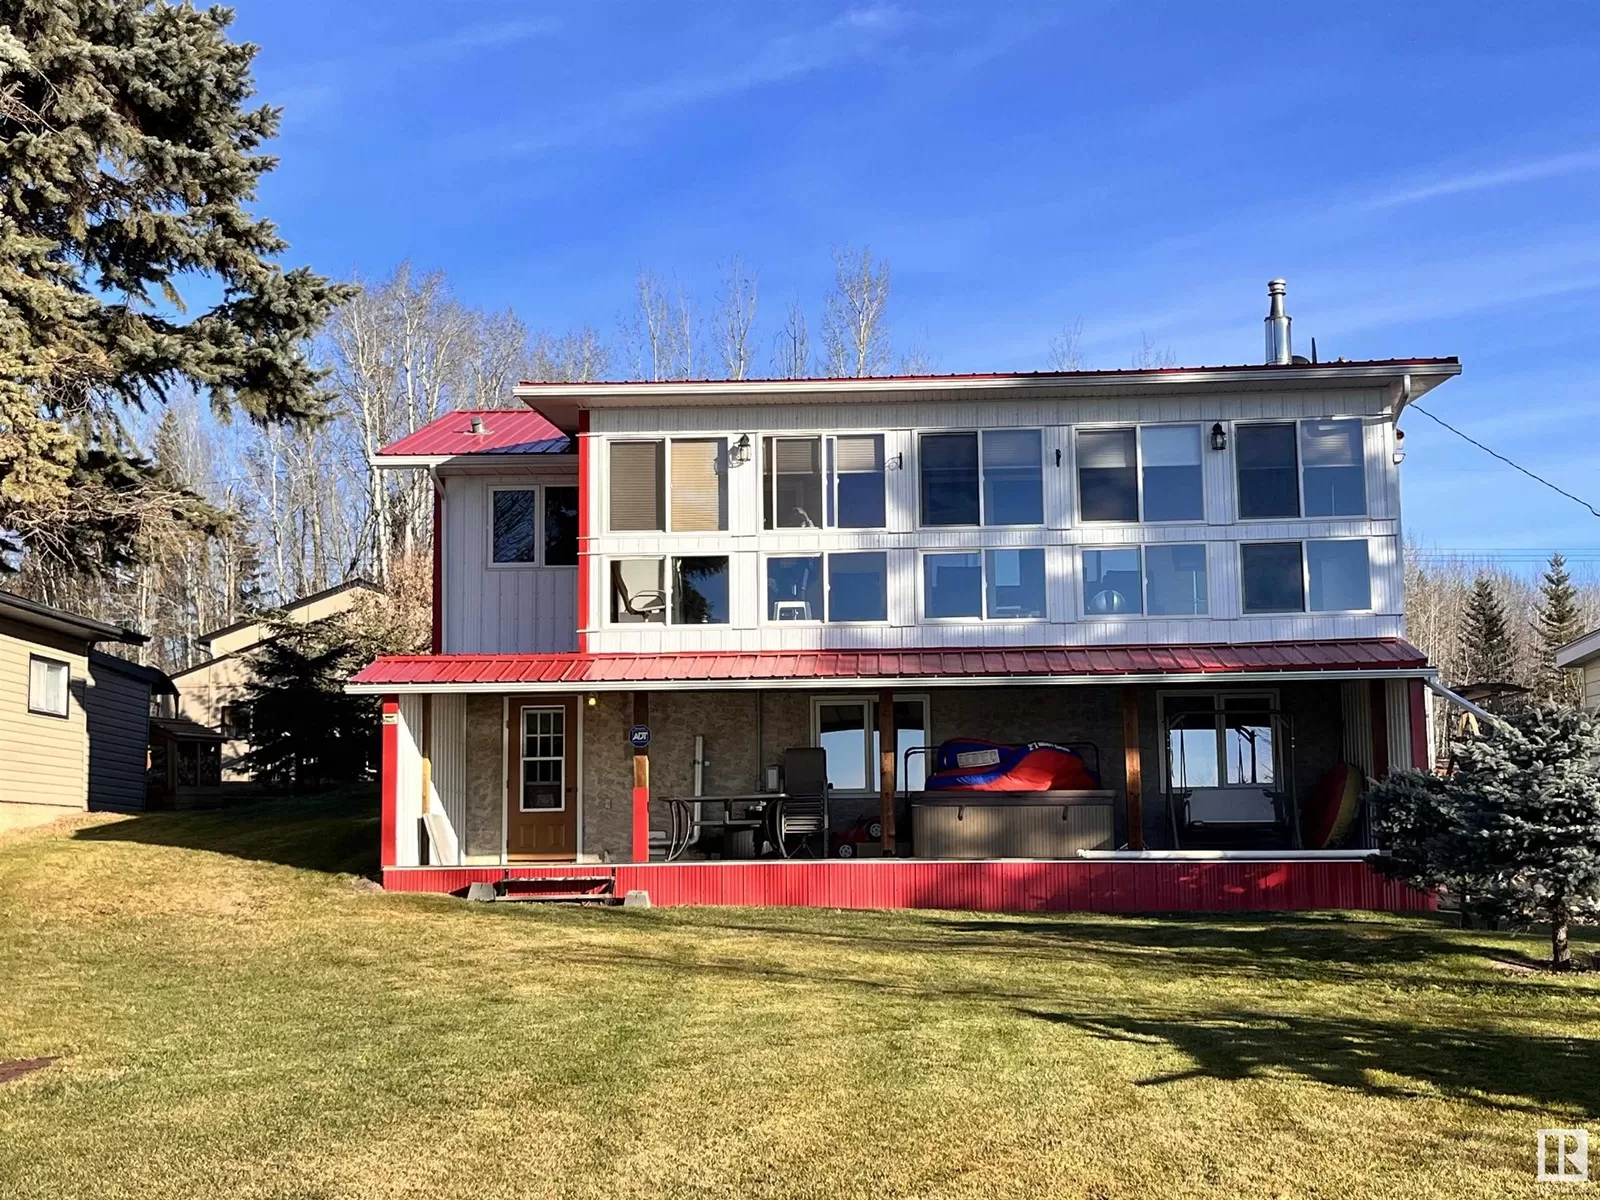 House for rent: 720 Willow Dr, Rural Athabasca County, Alberta T9S 1R6